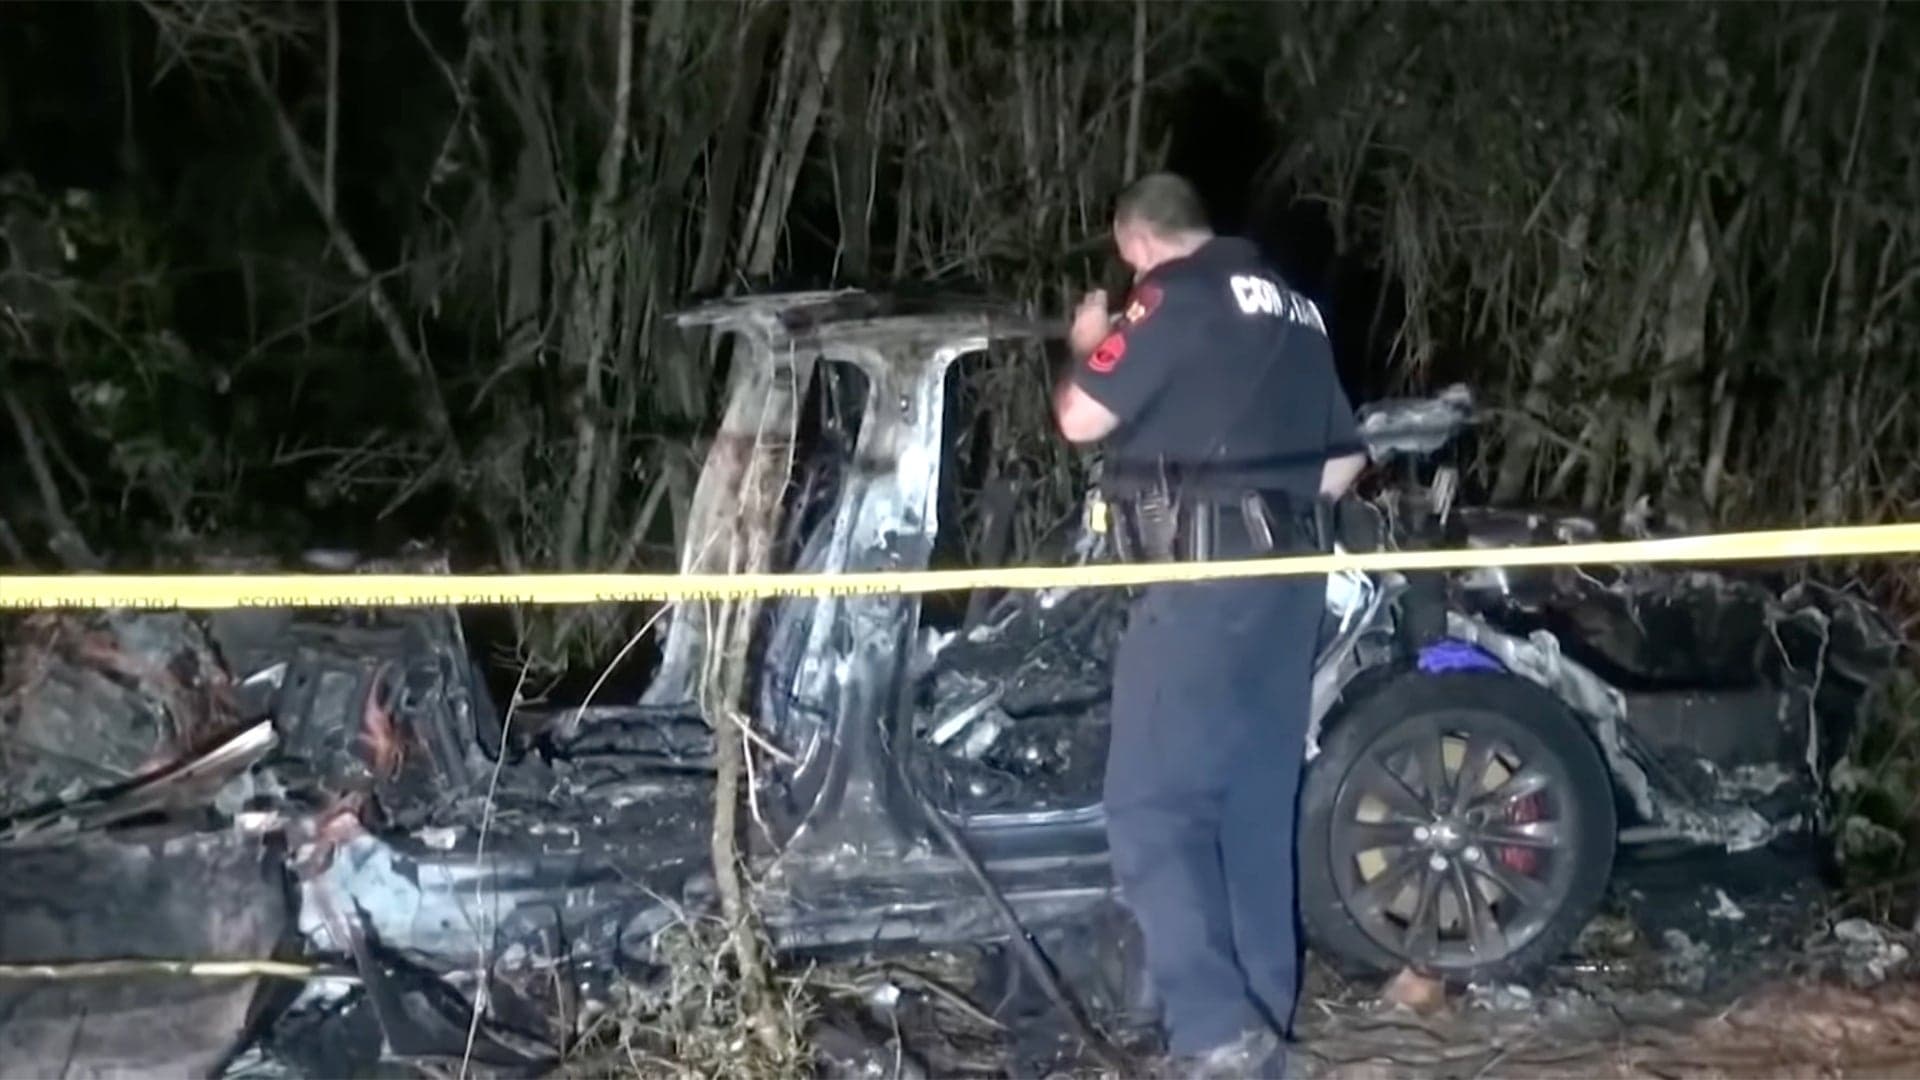 Elon Musk Denies Autopilot Use in Fatal Tesla Crash Where Police Claim ‘No One Was Driving’